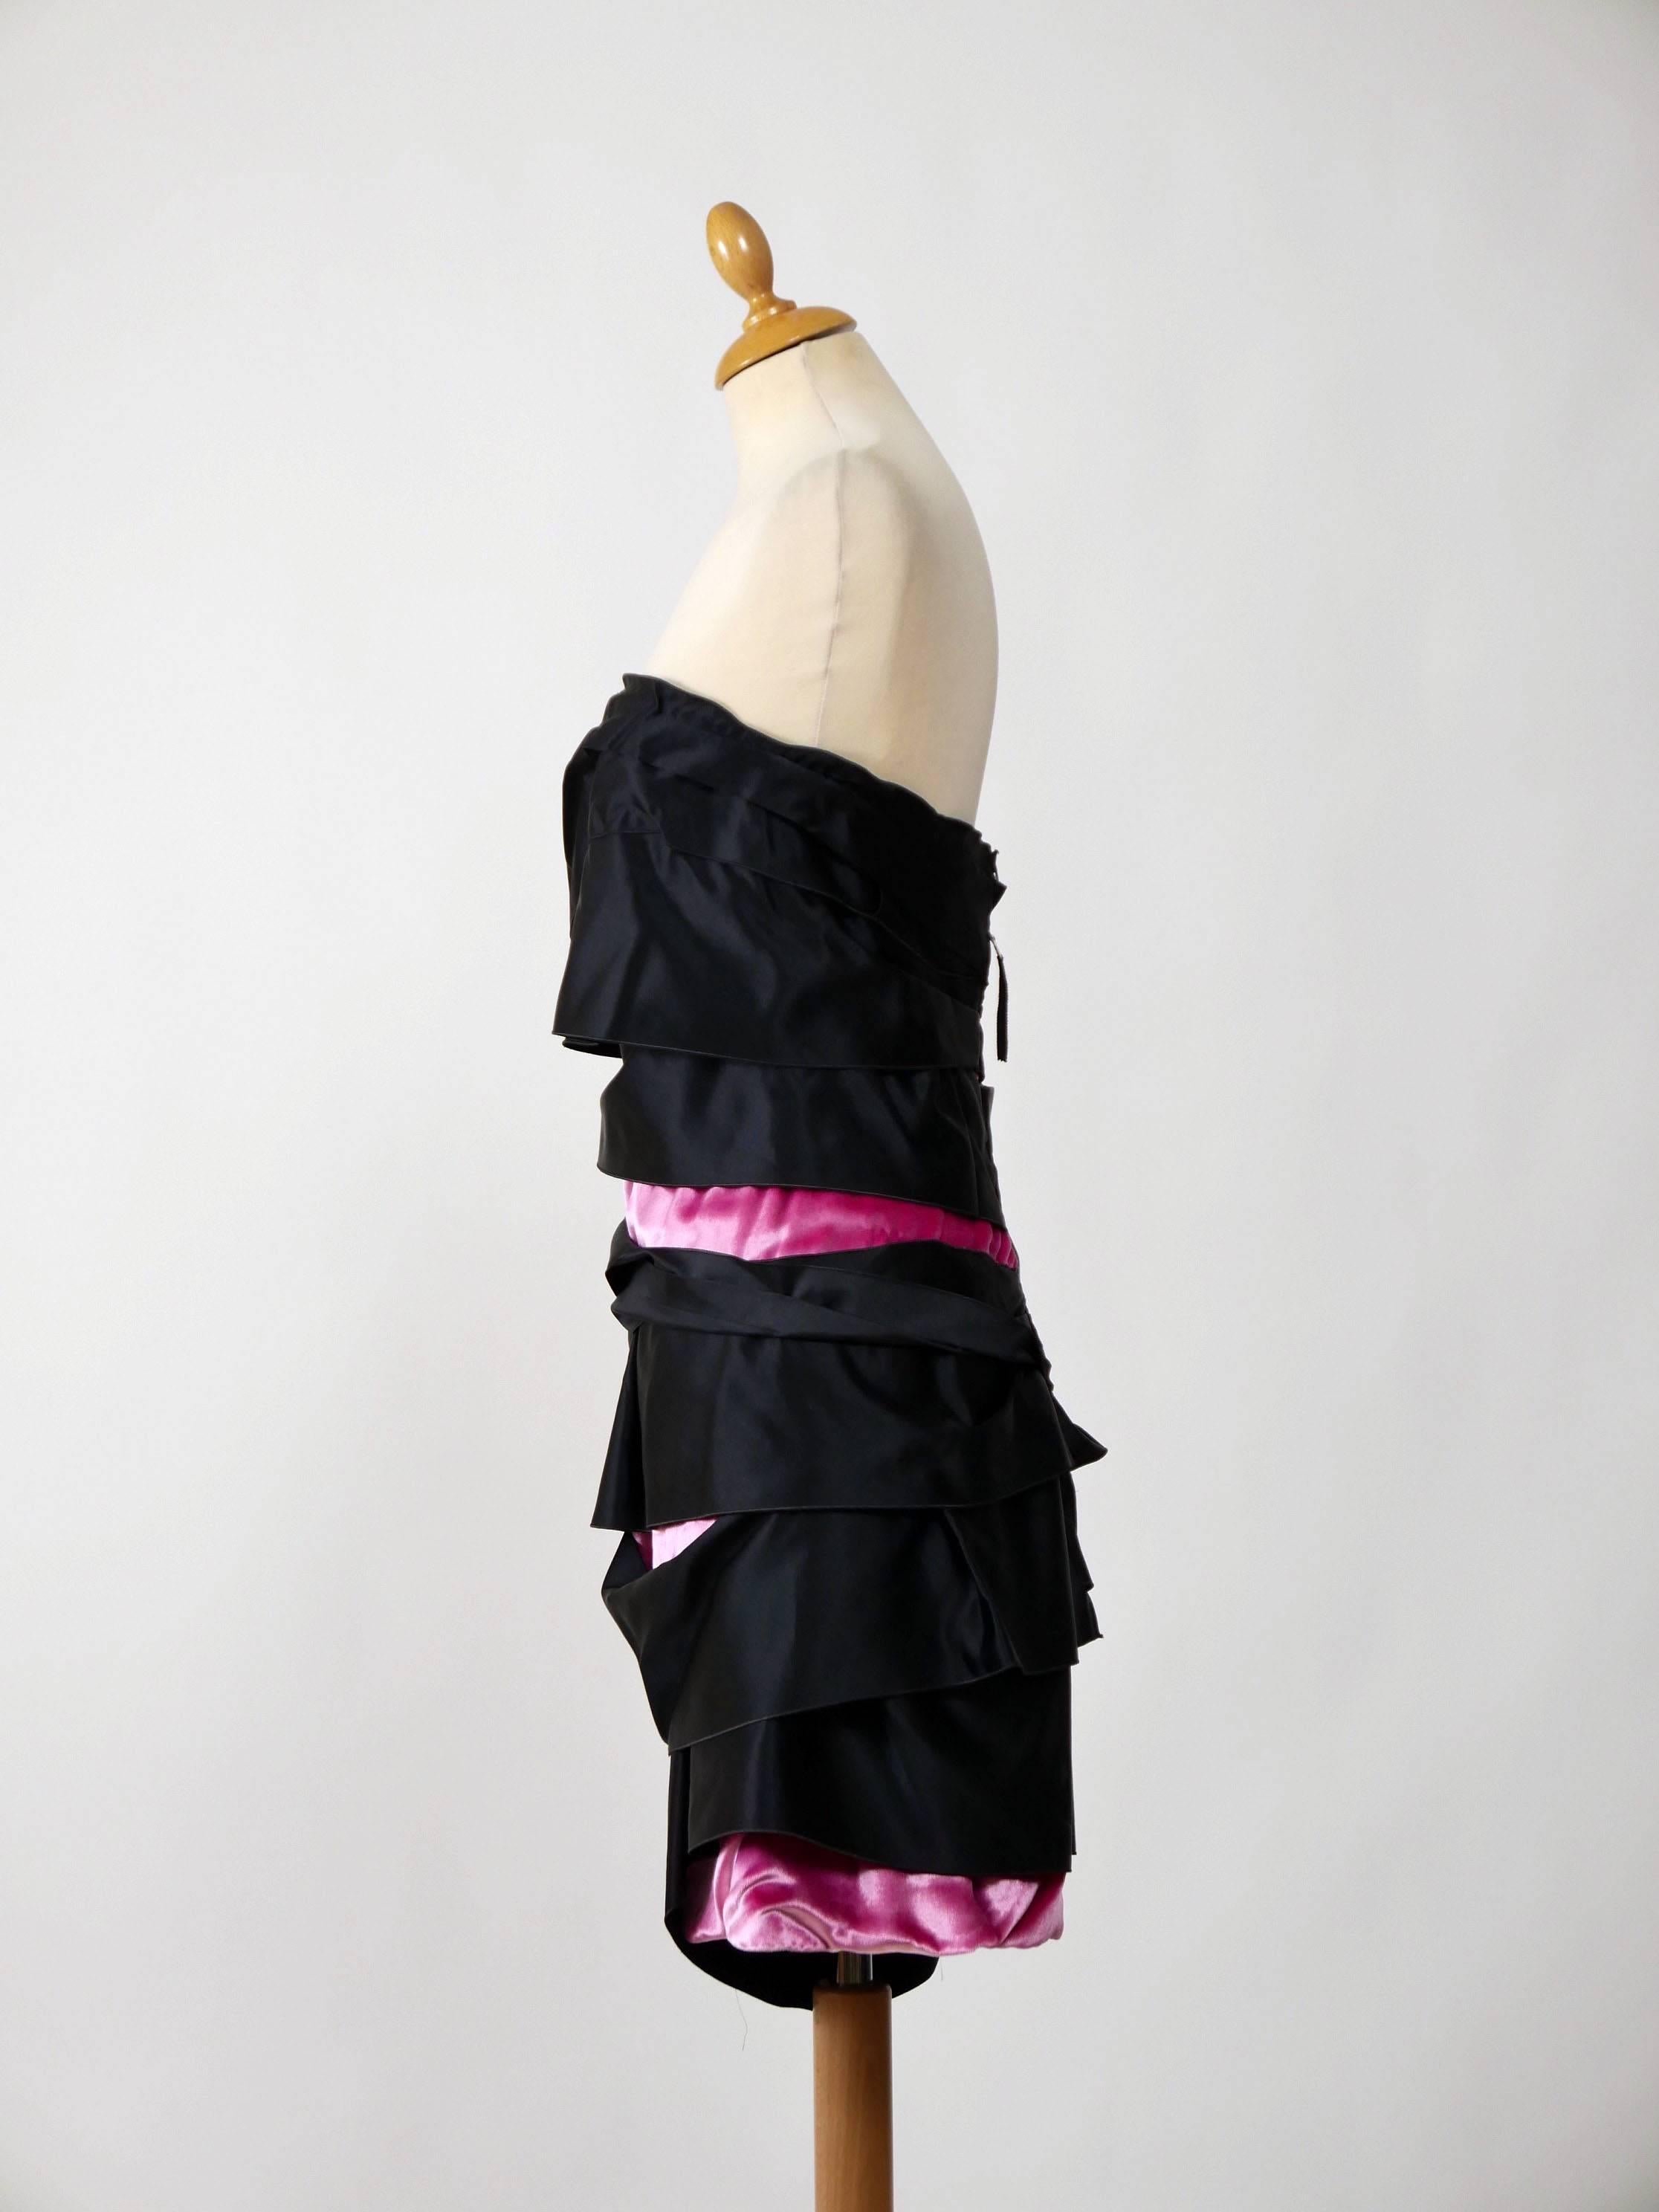 MARC JACOBS Black and Pink Strapless Mini Dress In Excellent Condition For Sale In Milan, Italy